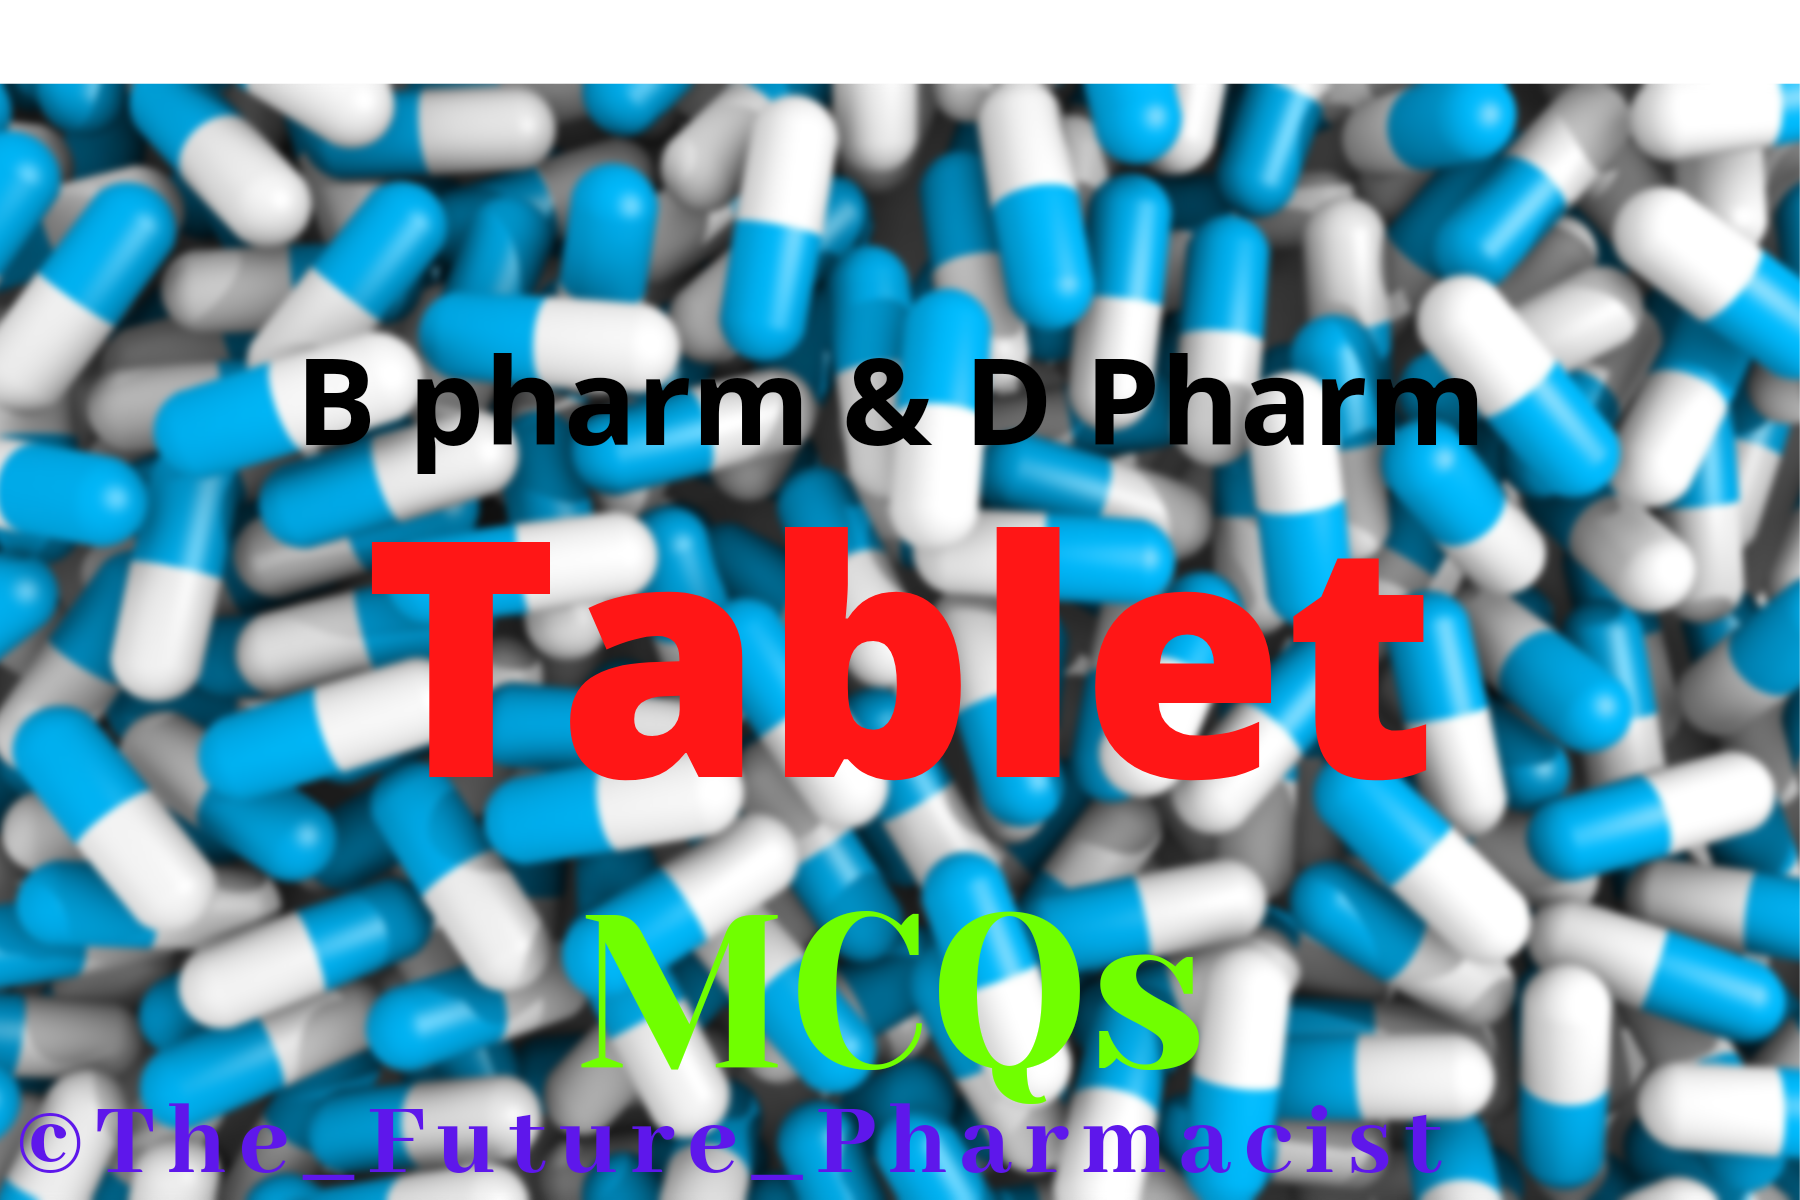 Tablets form Pharmaceutics Topic Wise MCQs for B pharmacy (sem 2) student and D Pharmacy (2 nd year) students as per PCI Syllabus | Free MCQs for GPAT and NIPER